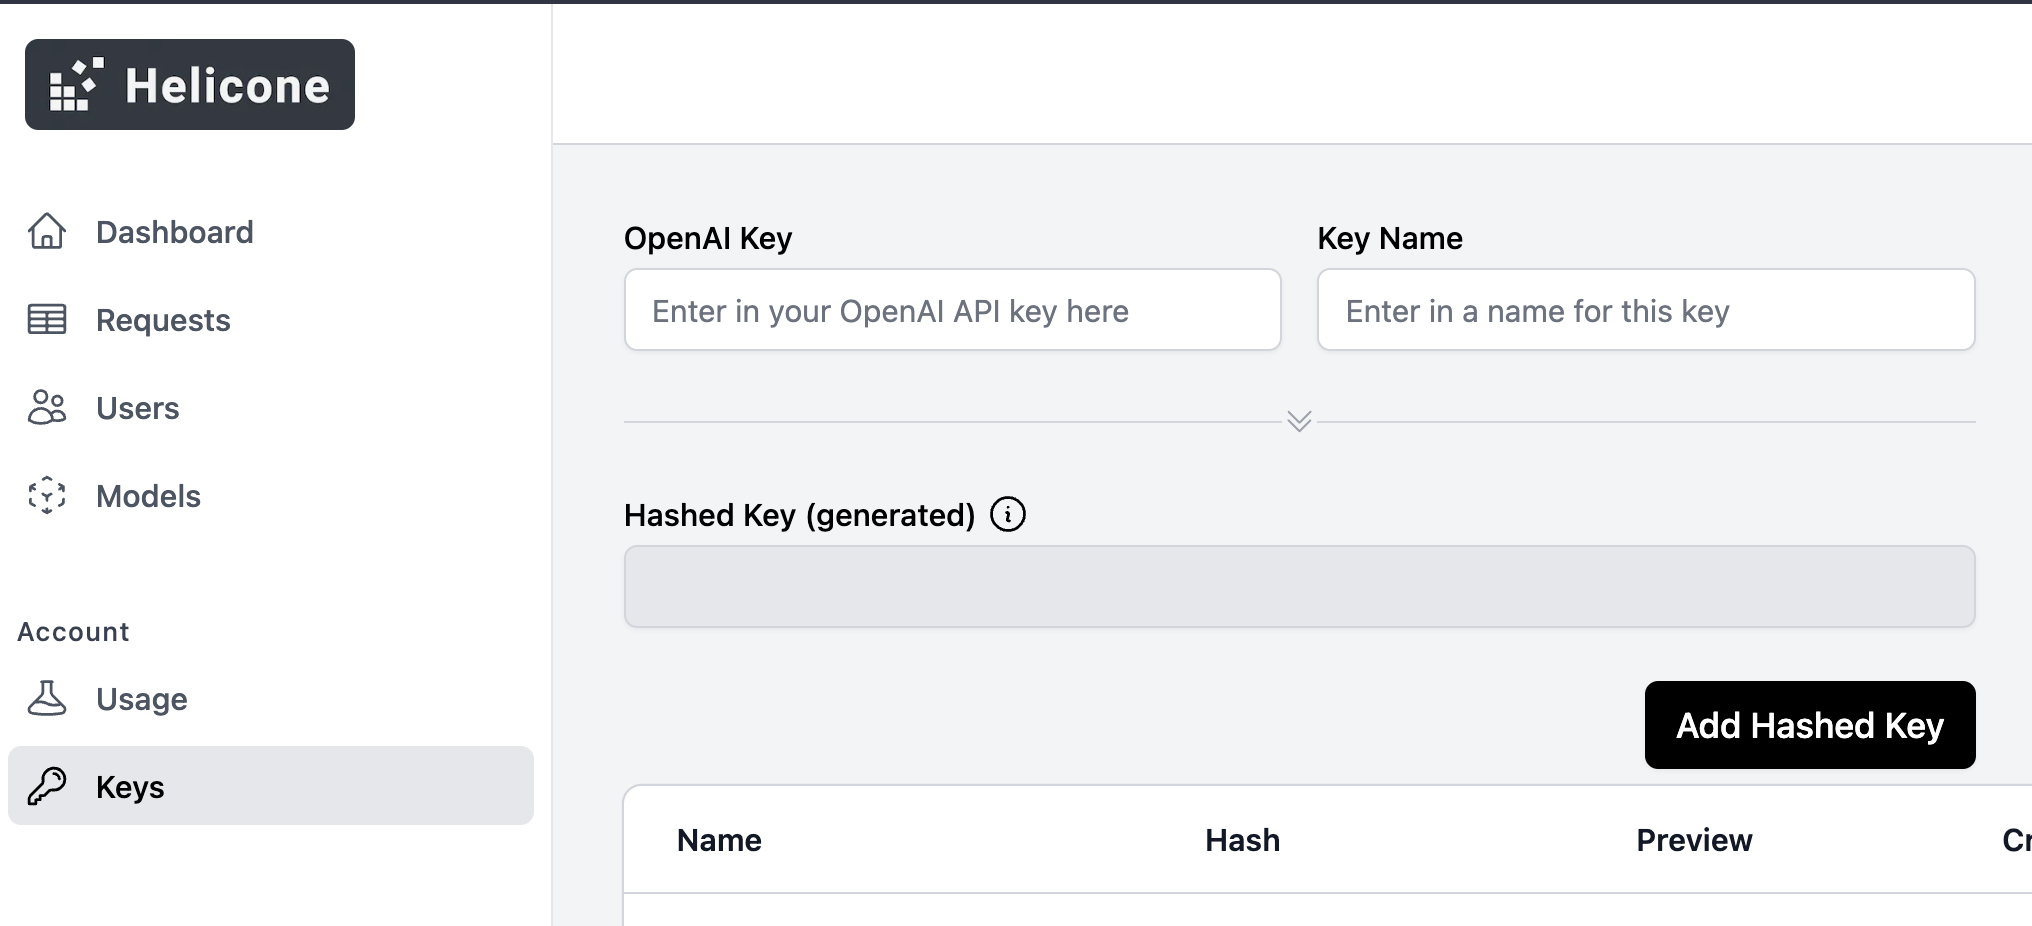 Interface for entering and managing OpenAI API keys in the Helicone dashboard.